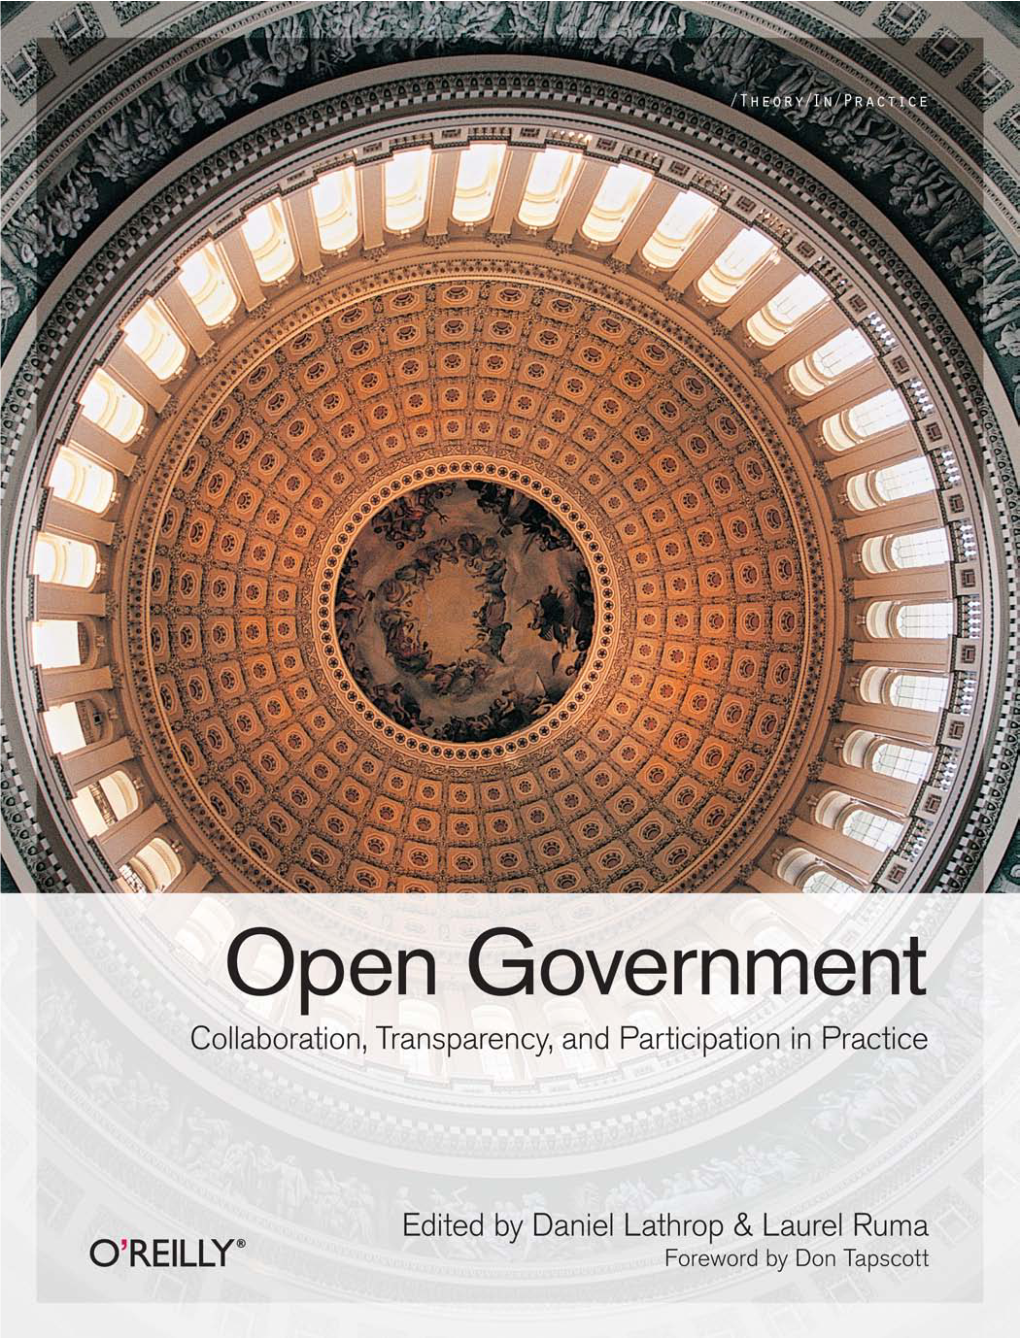 Open Government, the Image of the Capitol Building, and Related Trade Dress Are Trademarks of O’Reilly Media, Inc